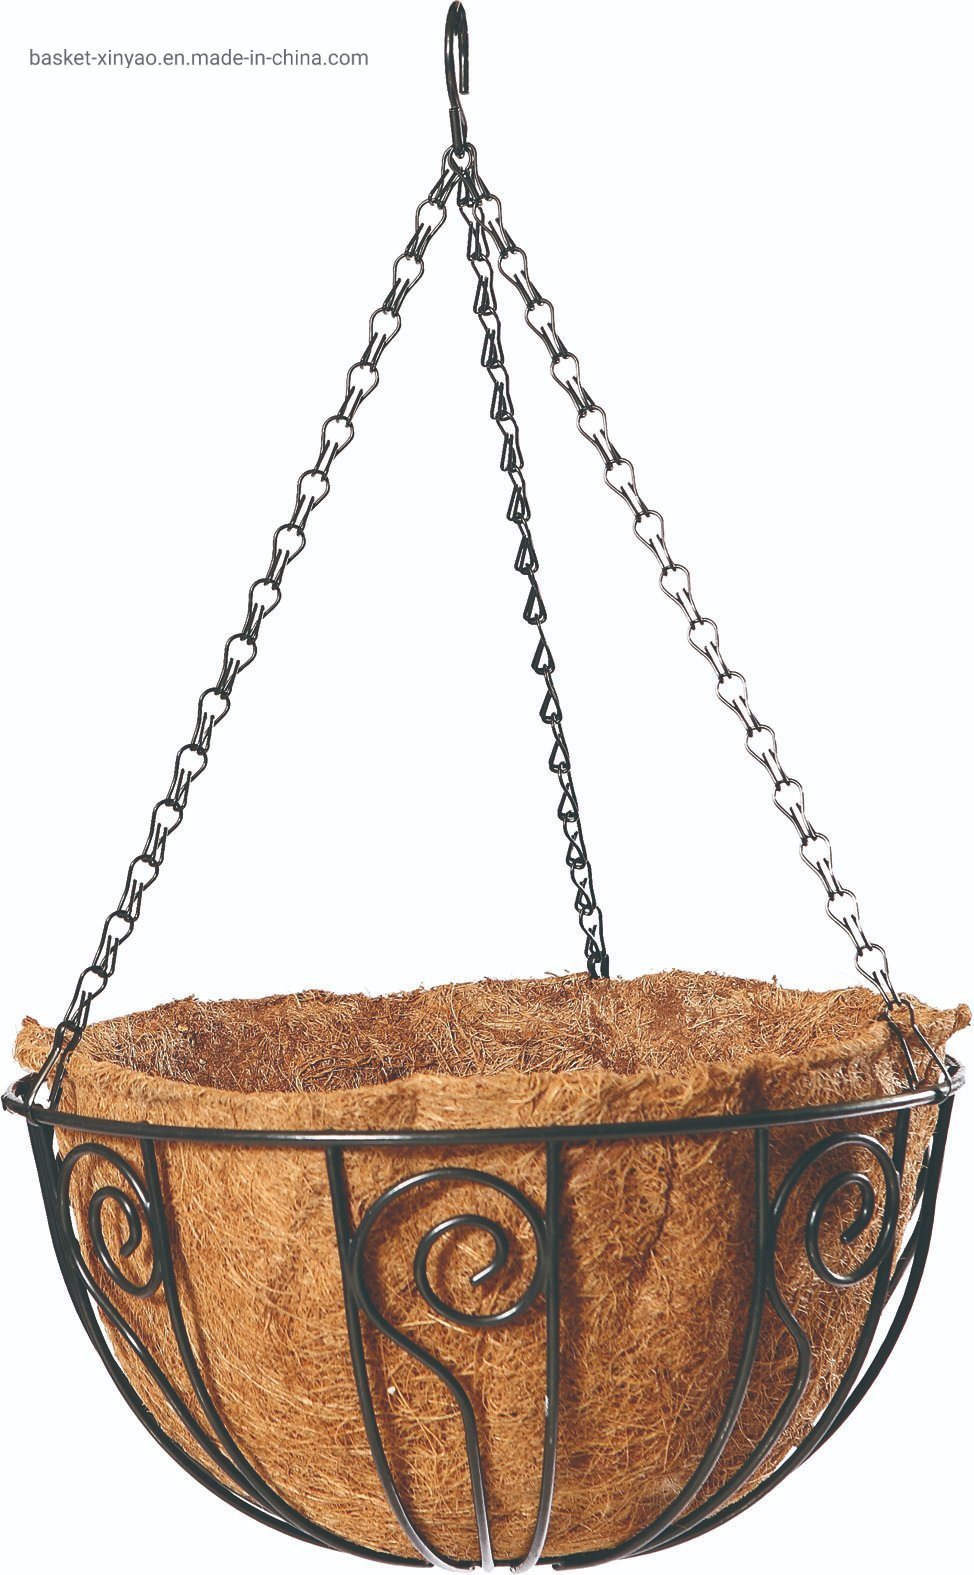 Snail-Shape Iron Wire Hanging Basket with Coco Liner and Chain (Bh090007)